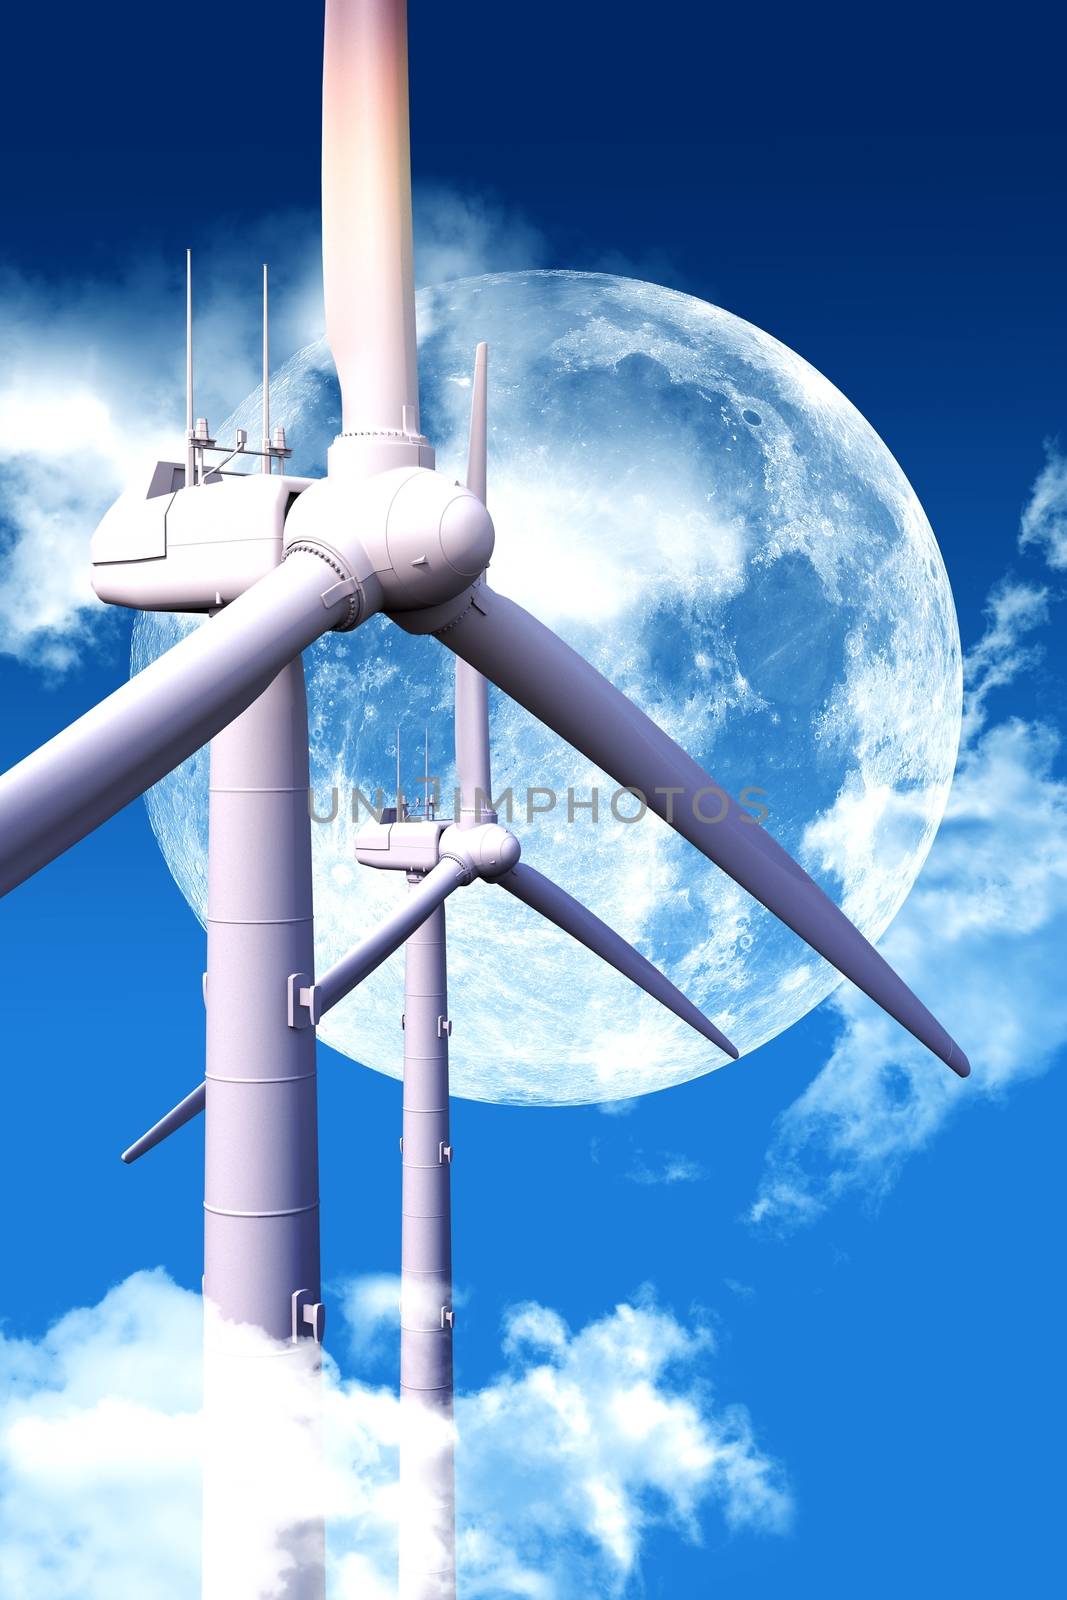 Wind Energy at Night. Cool Night Sky with Huge Moon and Two Modern Wind Turbines Between Clouds.